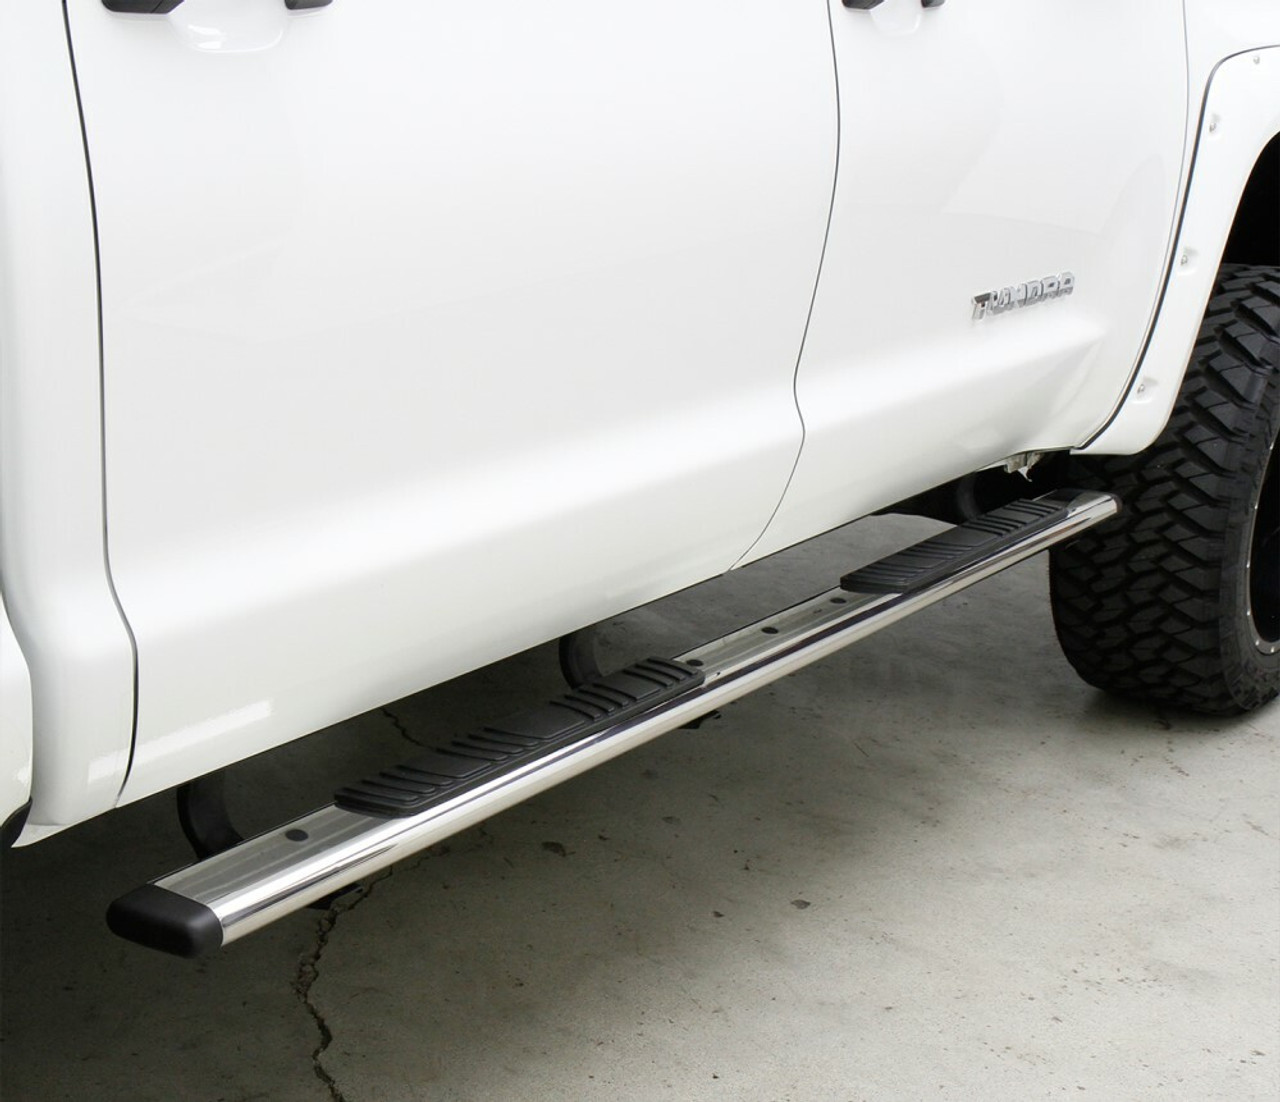 Go Rhino 685404680T Chevy, Silverado 1500 LD (Classic), 2014 - 2019, 5 inch OE Xtreme Low Profile - Complete Kit: Galvanized Steel, Textured black, 650080T side bars + 6840465 OE Xtreme Brackets. 5 inch x 80 inch bars. Classic Body Style Only